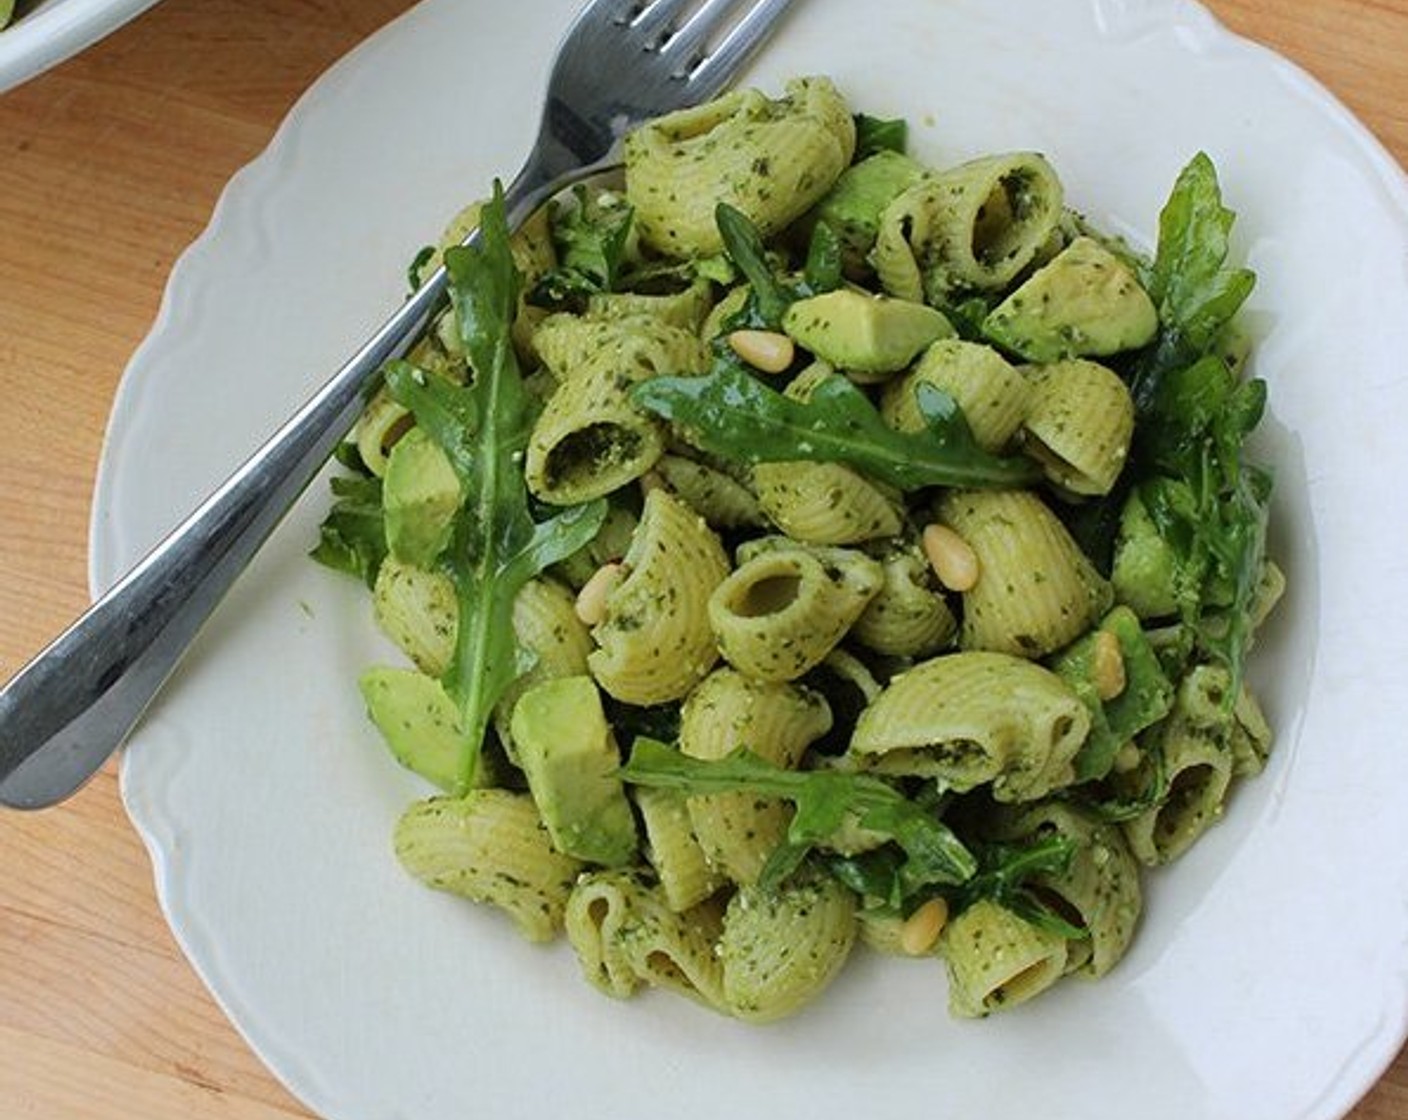 step 8 Add the avocado to the pasta and toss gently to combine. Taste for seasonings and serve at room temperature.